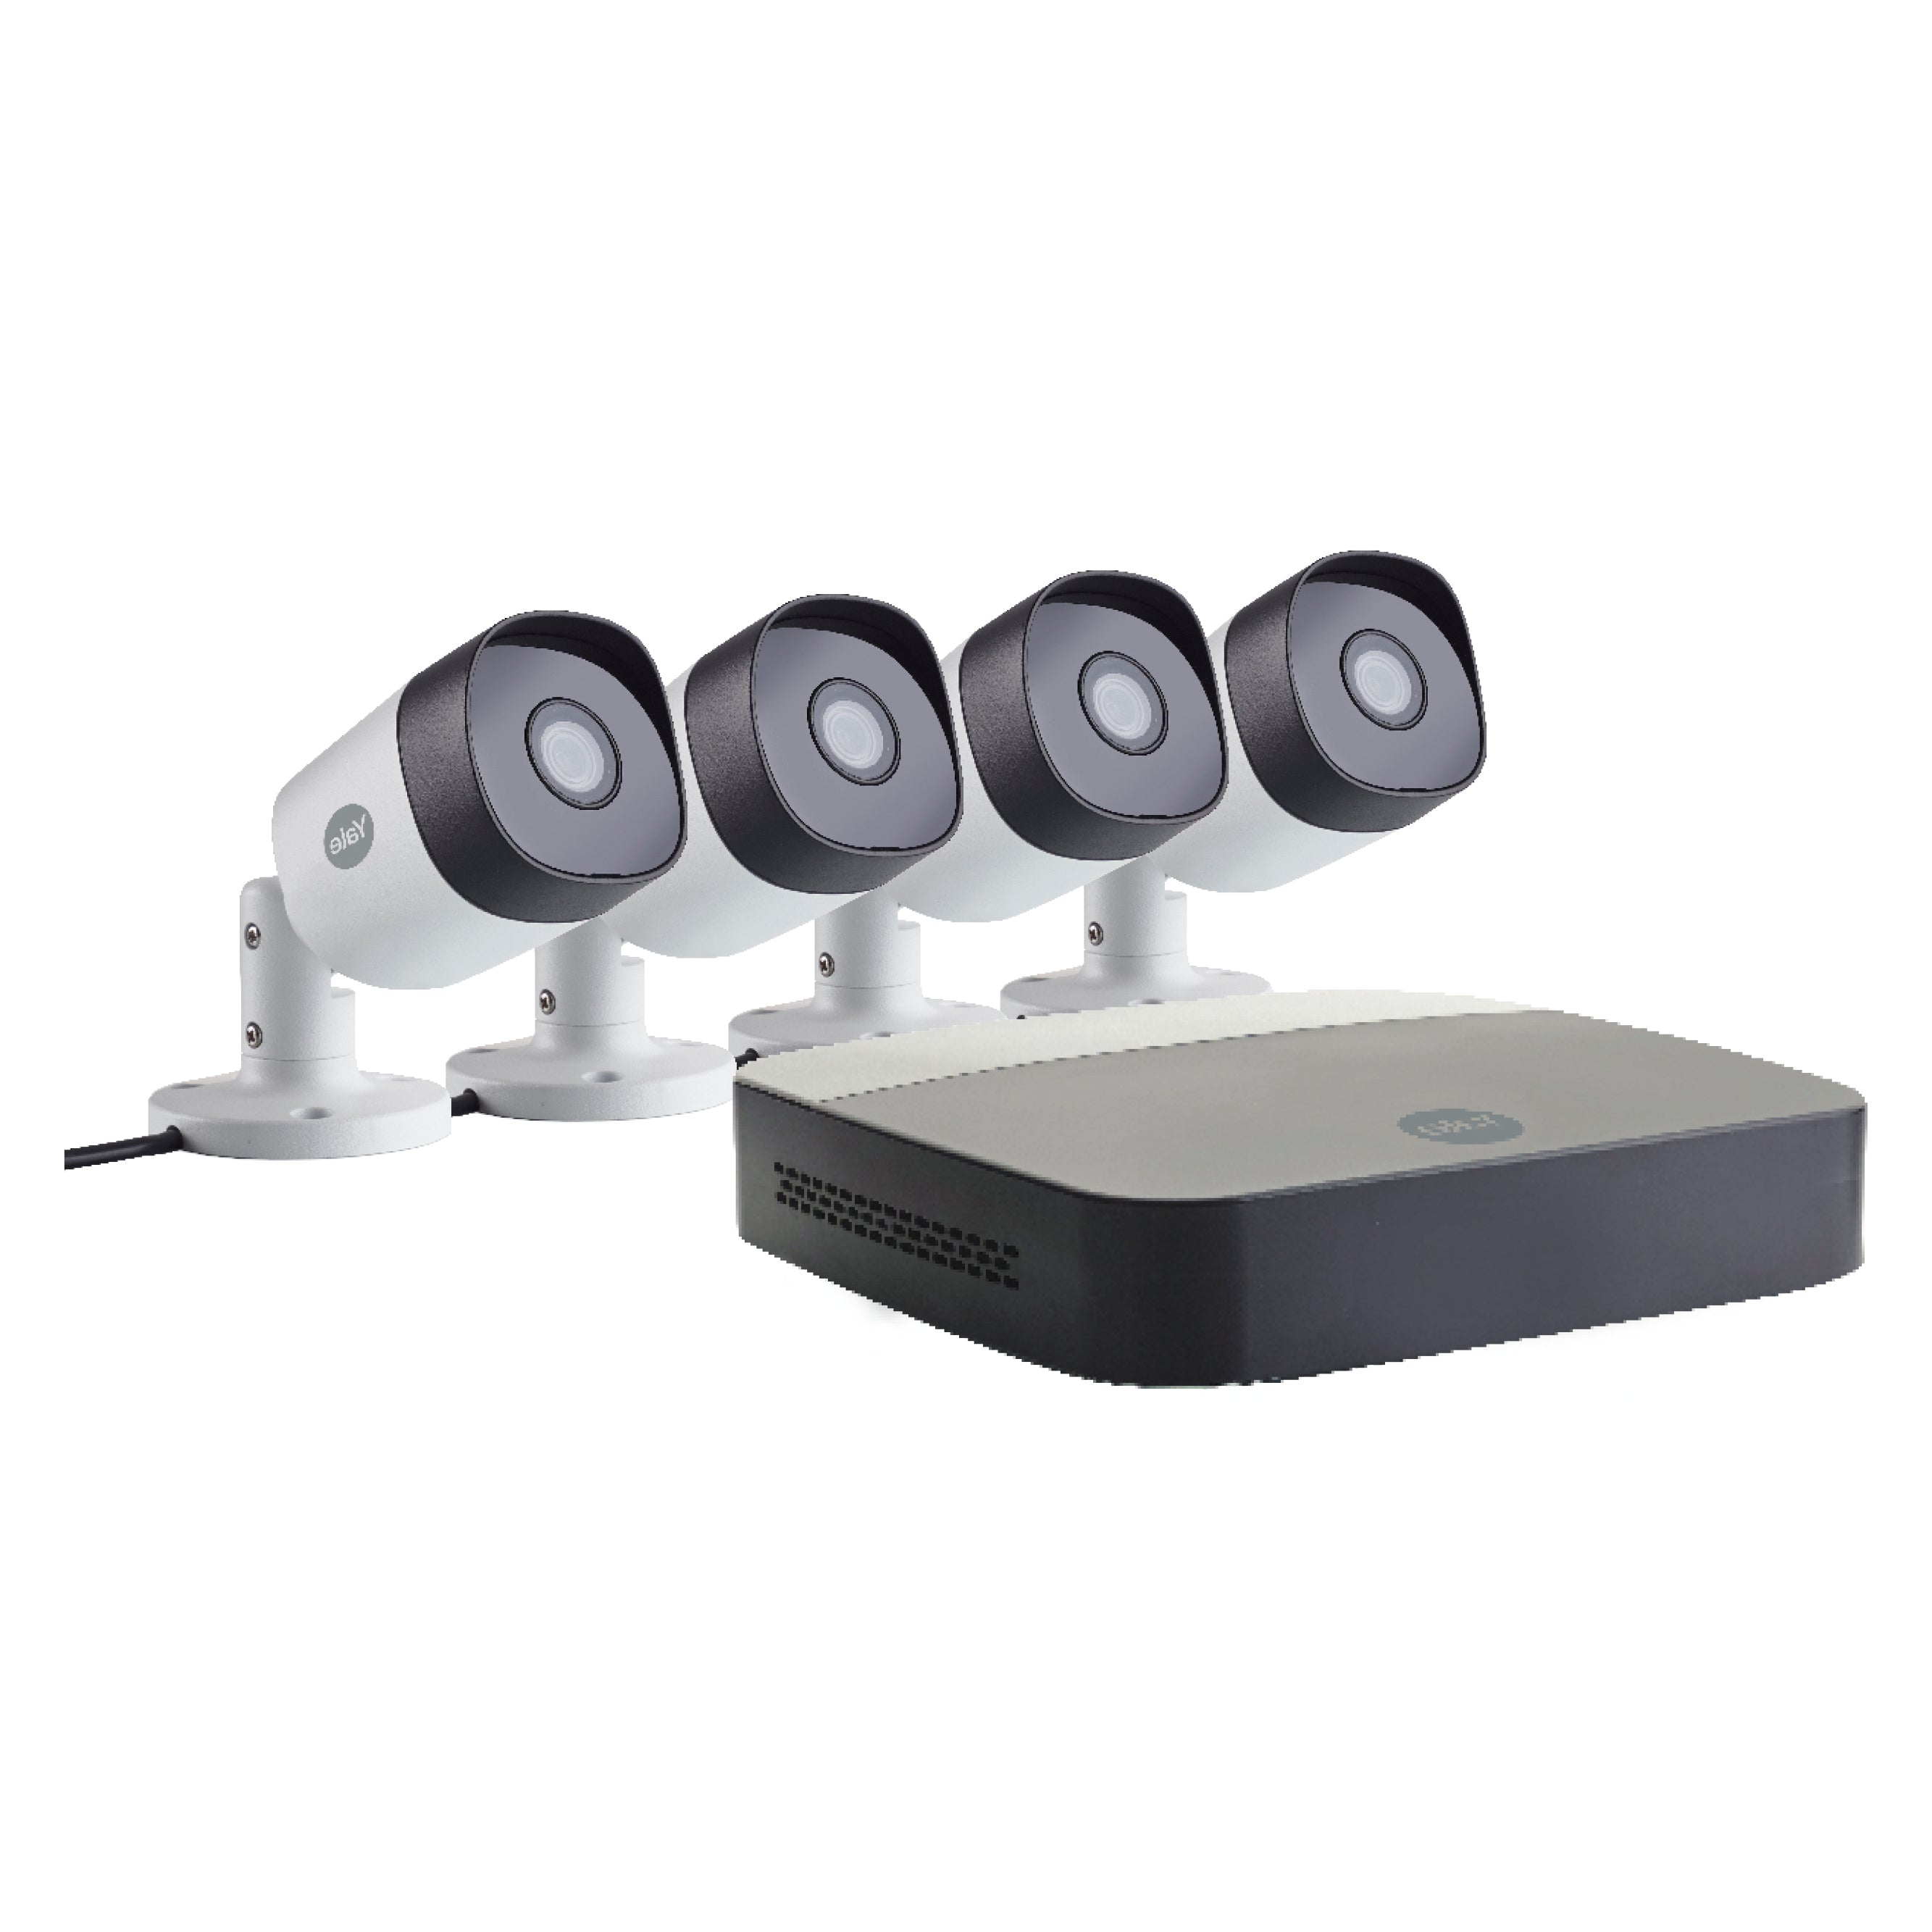 Yale Smart Home CCTV Kit XL with 4 Full HD Outdoor Cameras